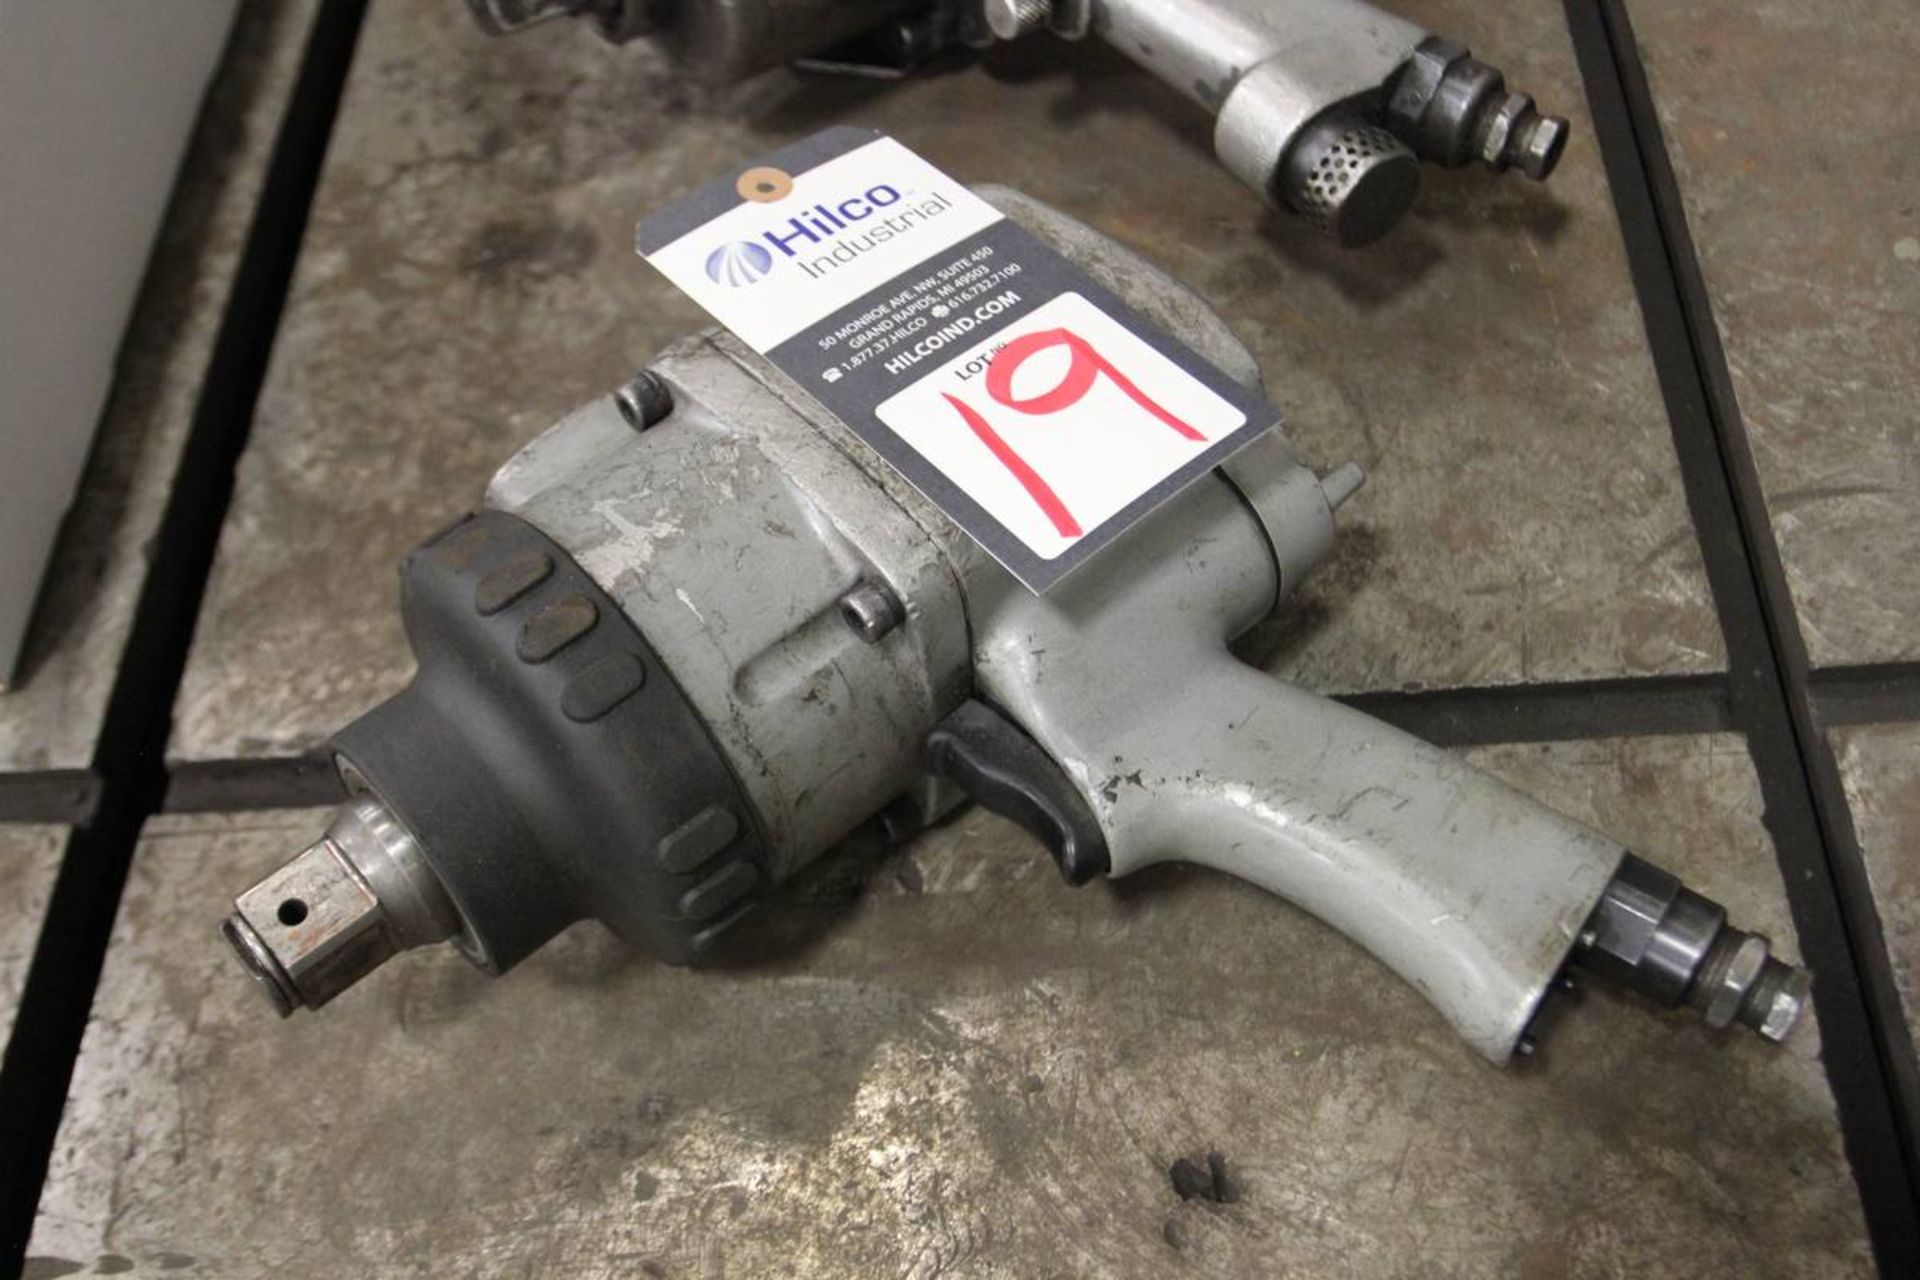 Ingersoll Rand Model 295A 1" Drive Pneumatic Impact Wrench